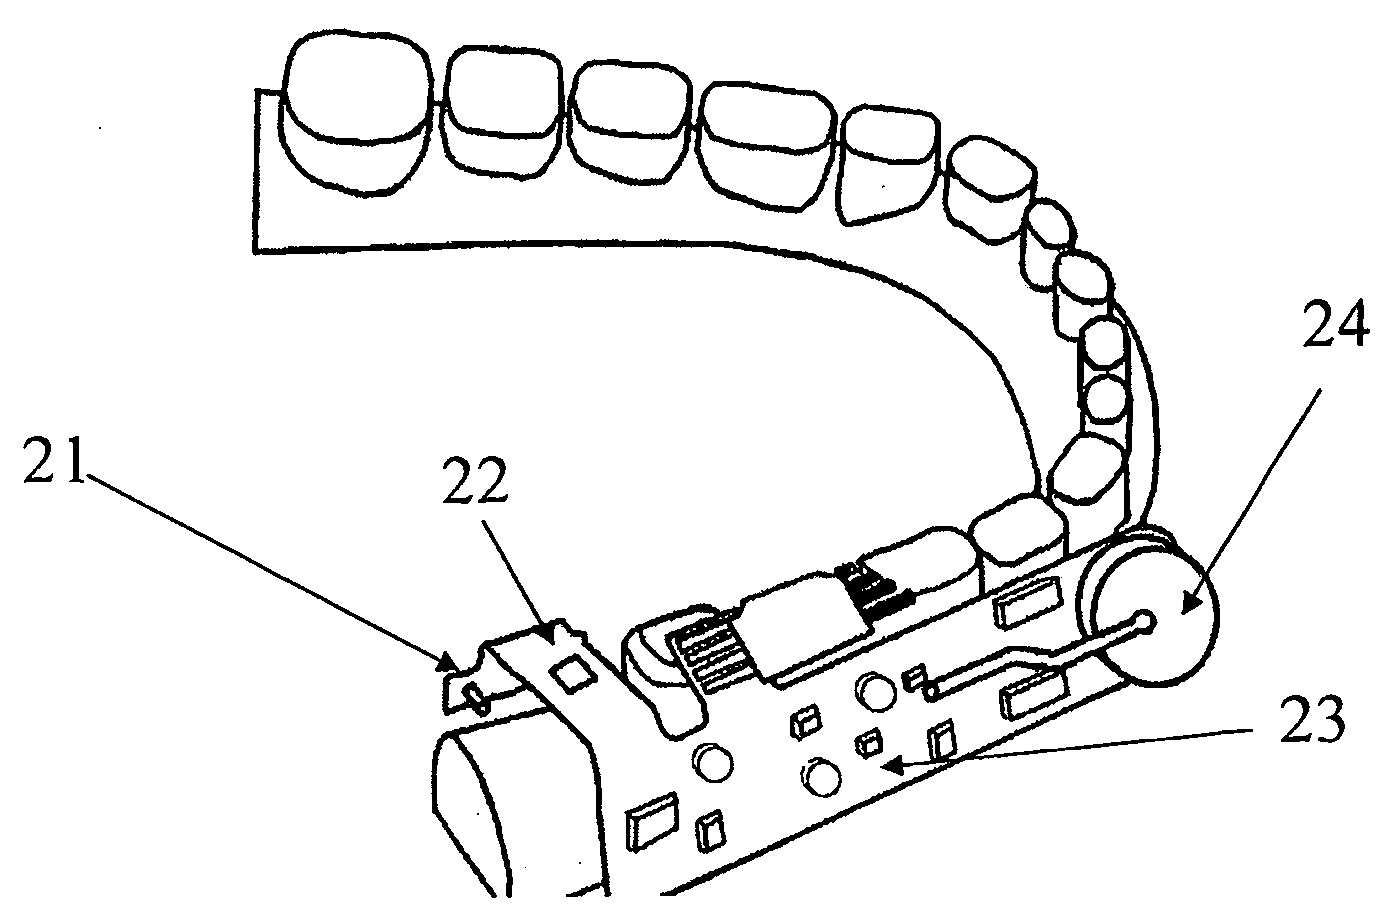 Manufacturing methods, testing methods, and testers for intra-oral electronically embedded devices